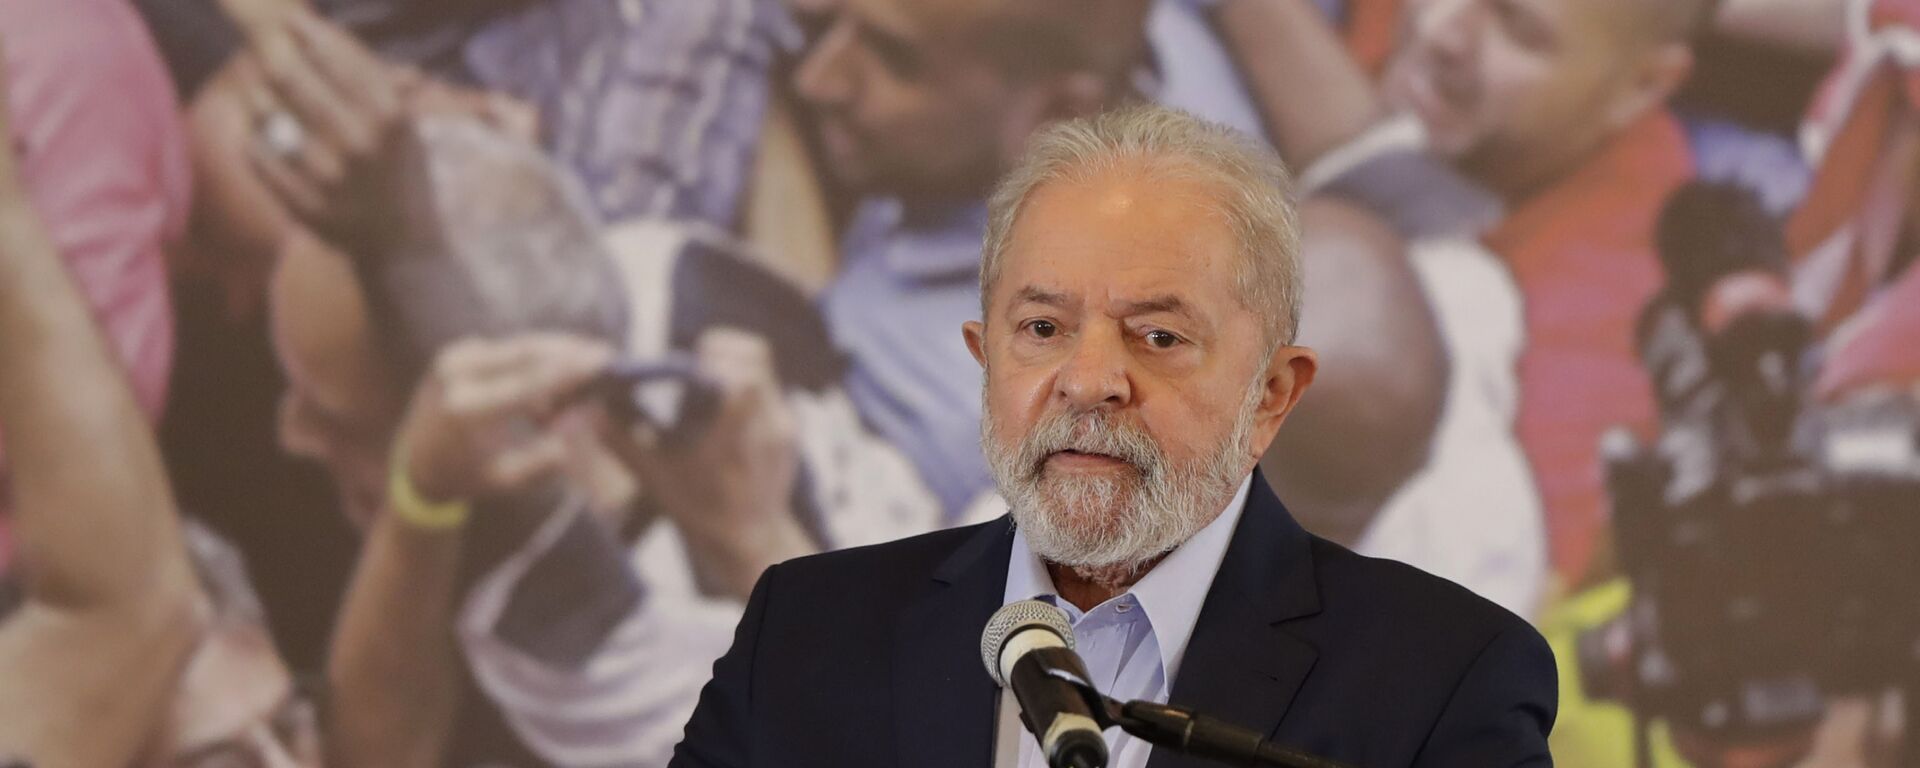 In this March 10, 2021, file photo, former Brazilian President Luiz Inacio Lula da Silva speaks at the Metalworkers Union headquarters in Sao Bernardo do Campo, Sao Paulo state, Brazil, after a judge threw out both of his corruption convictions. - Sputnik International, 1920, 13.09.2022